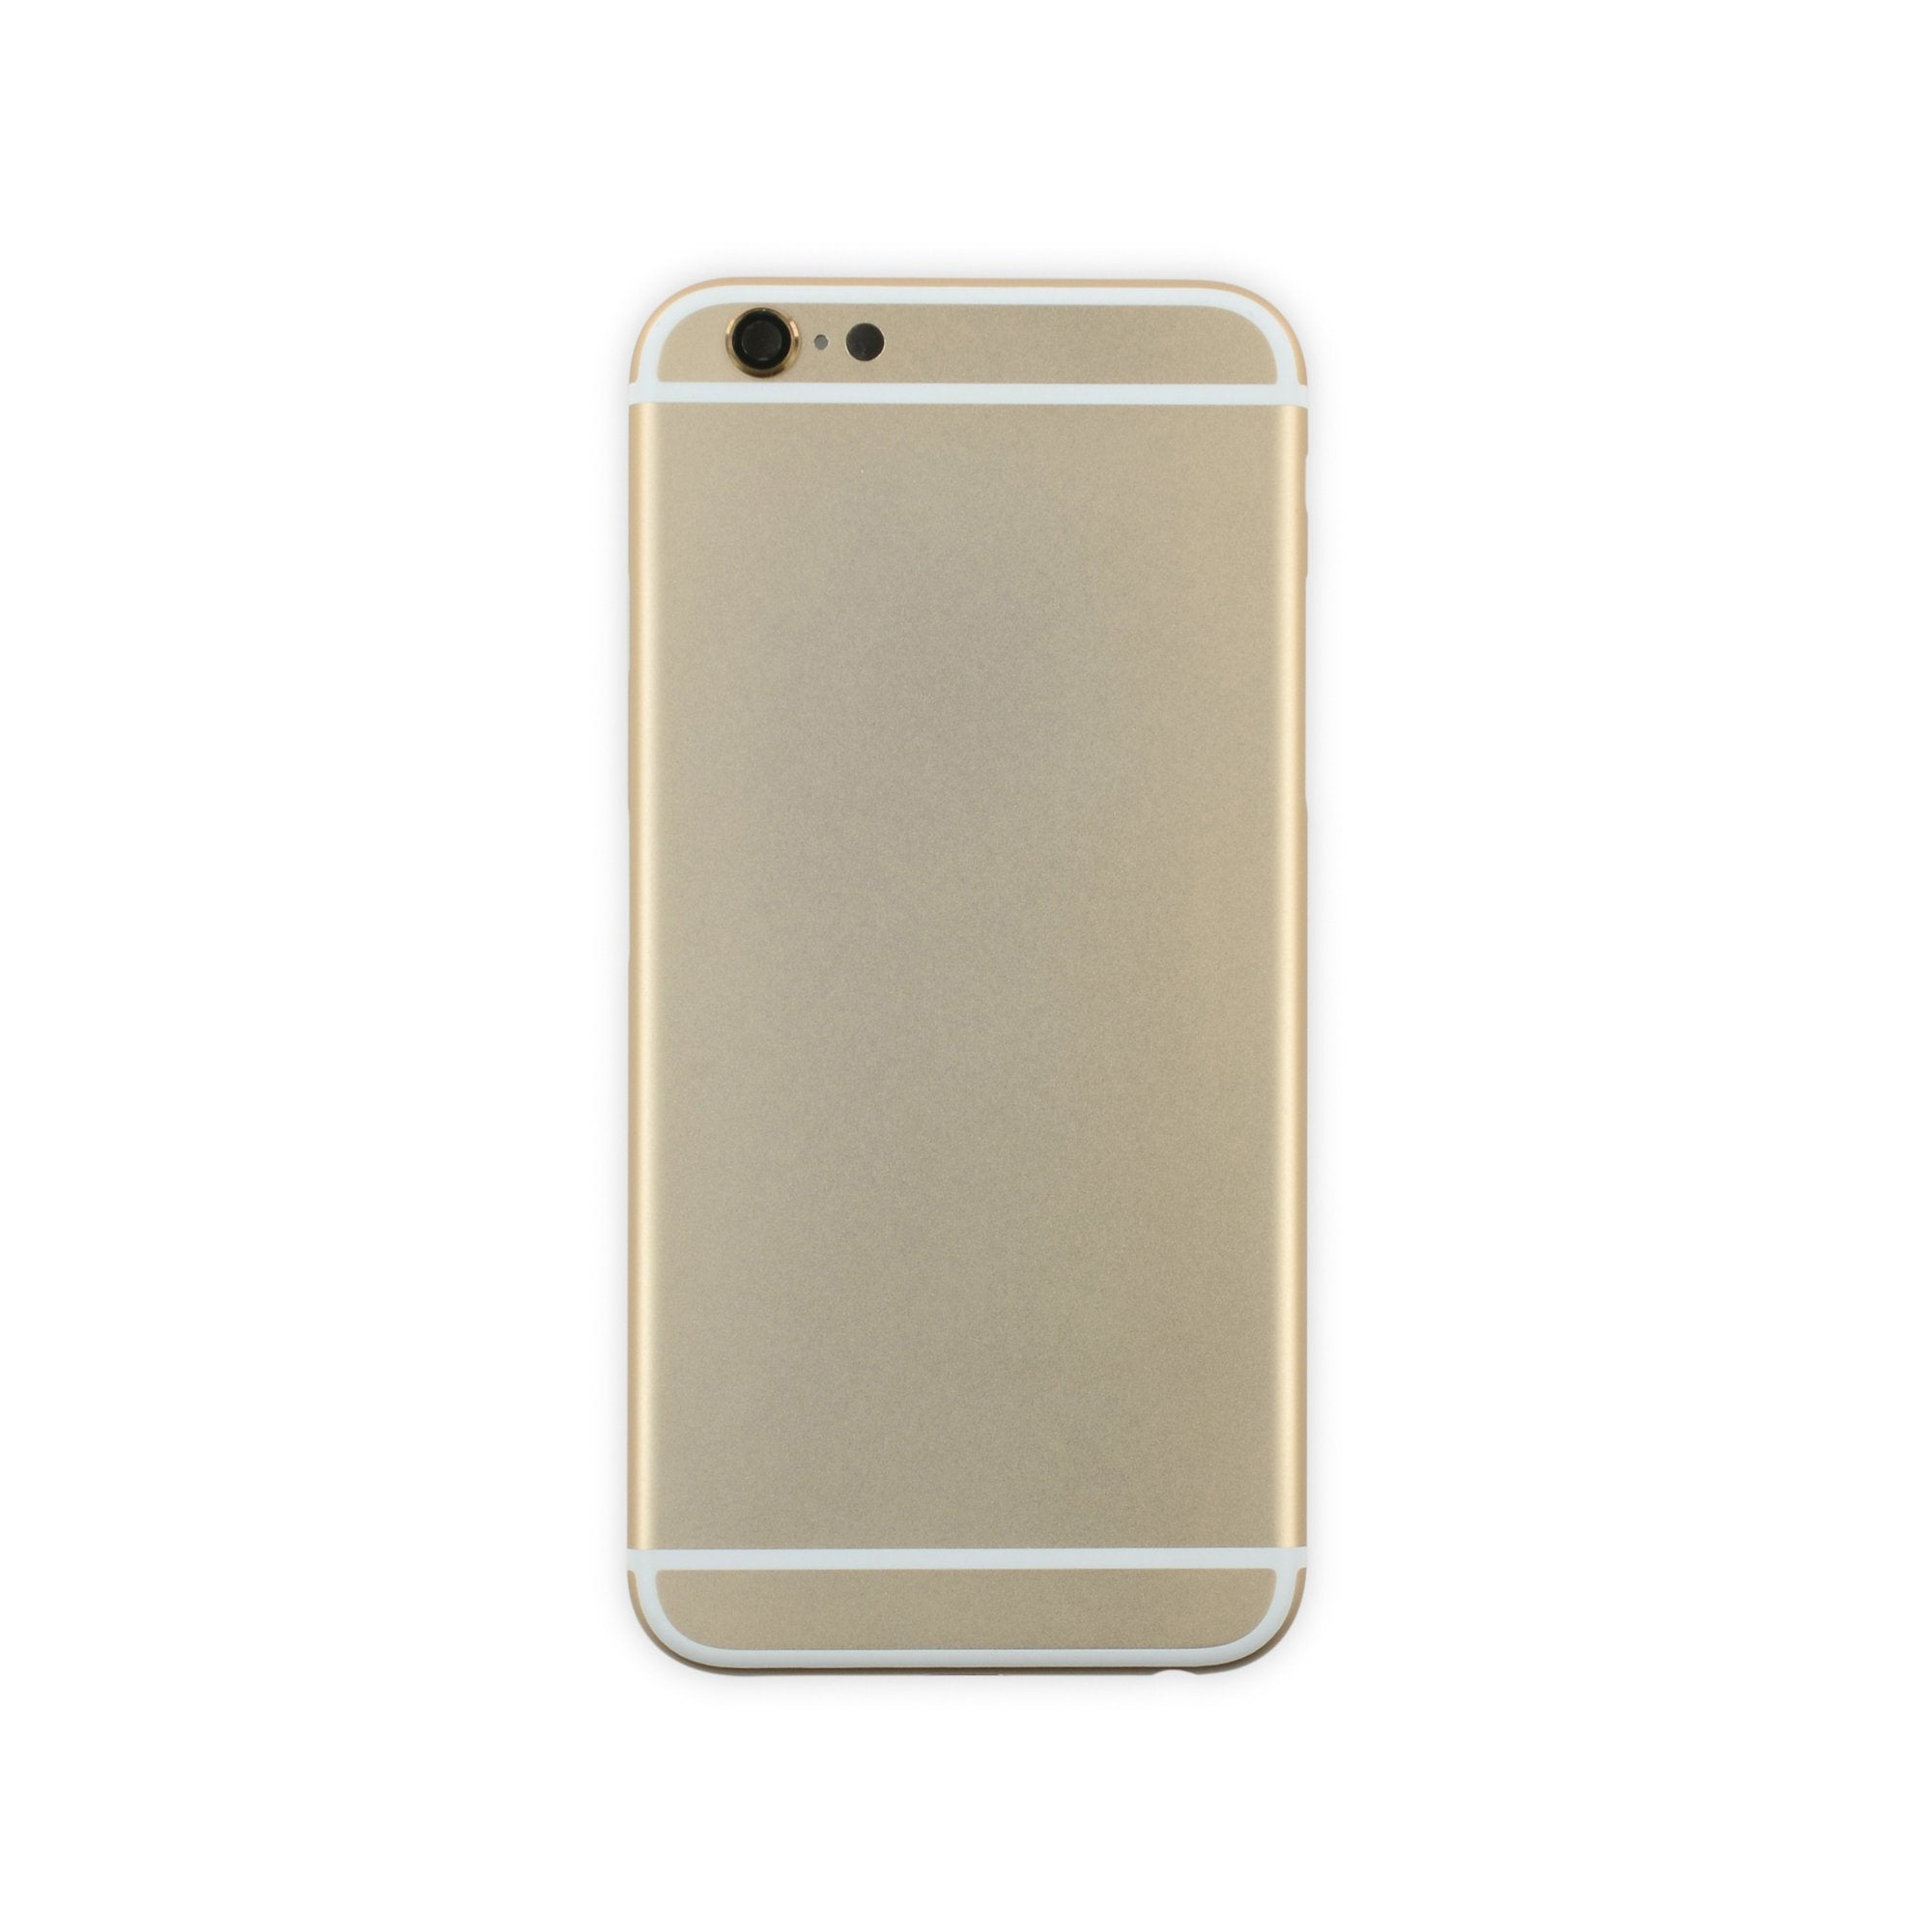 iPhone 6 Blank Rear Case Gold New